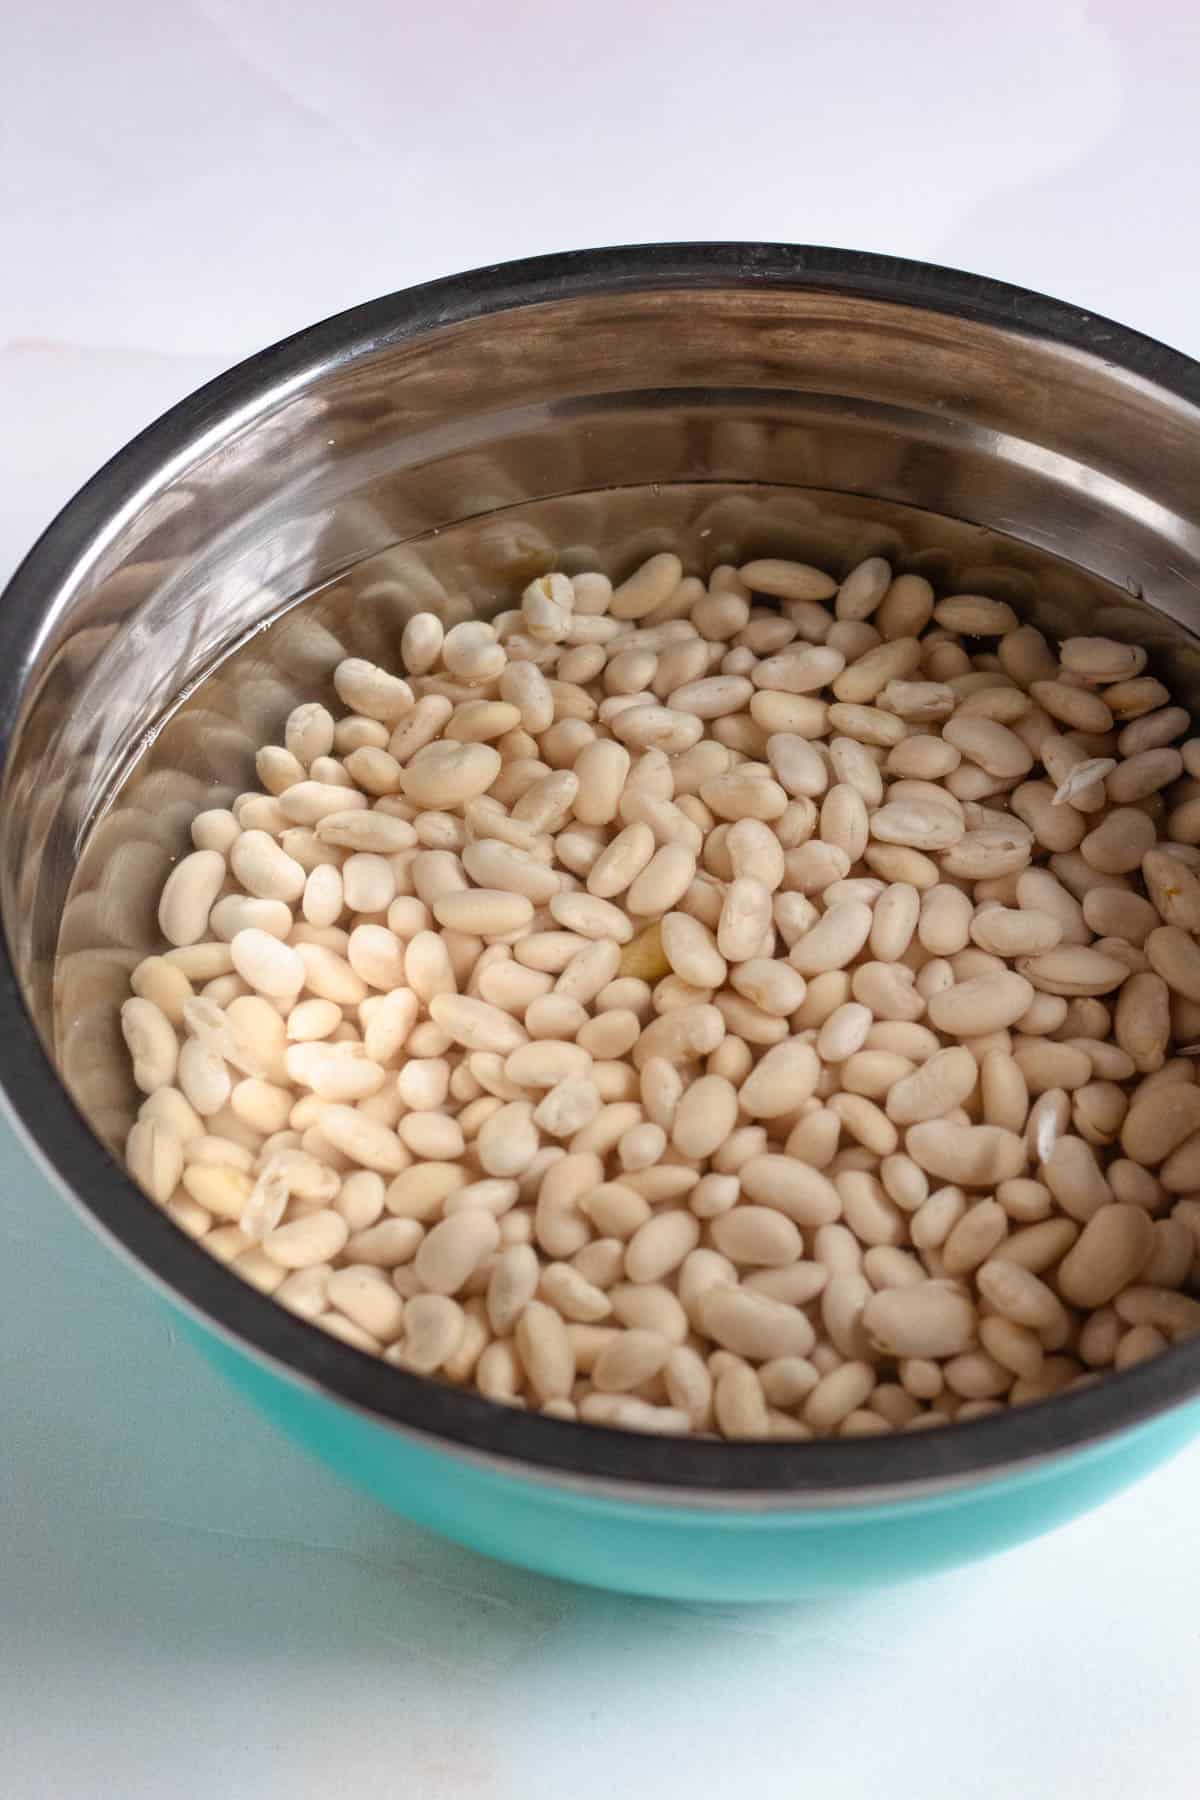 White cannellini beans soaking in water.